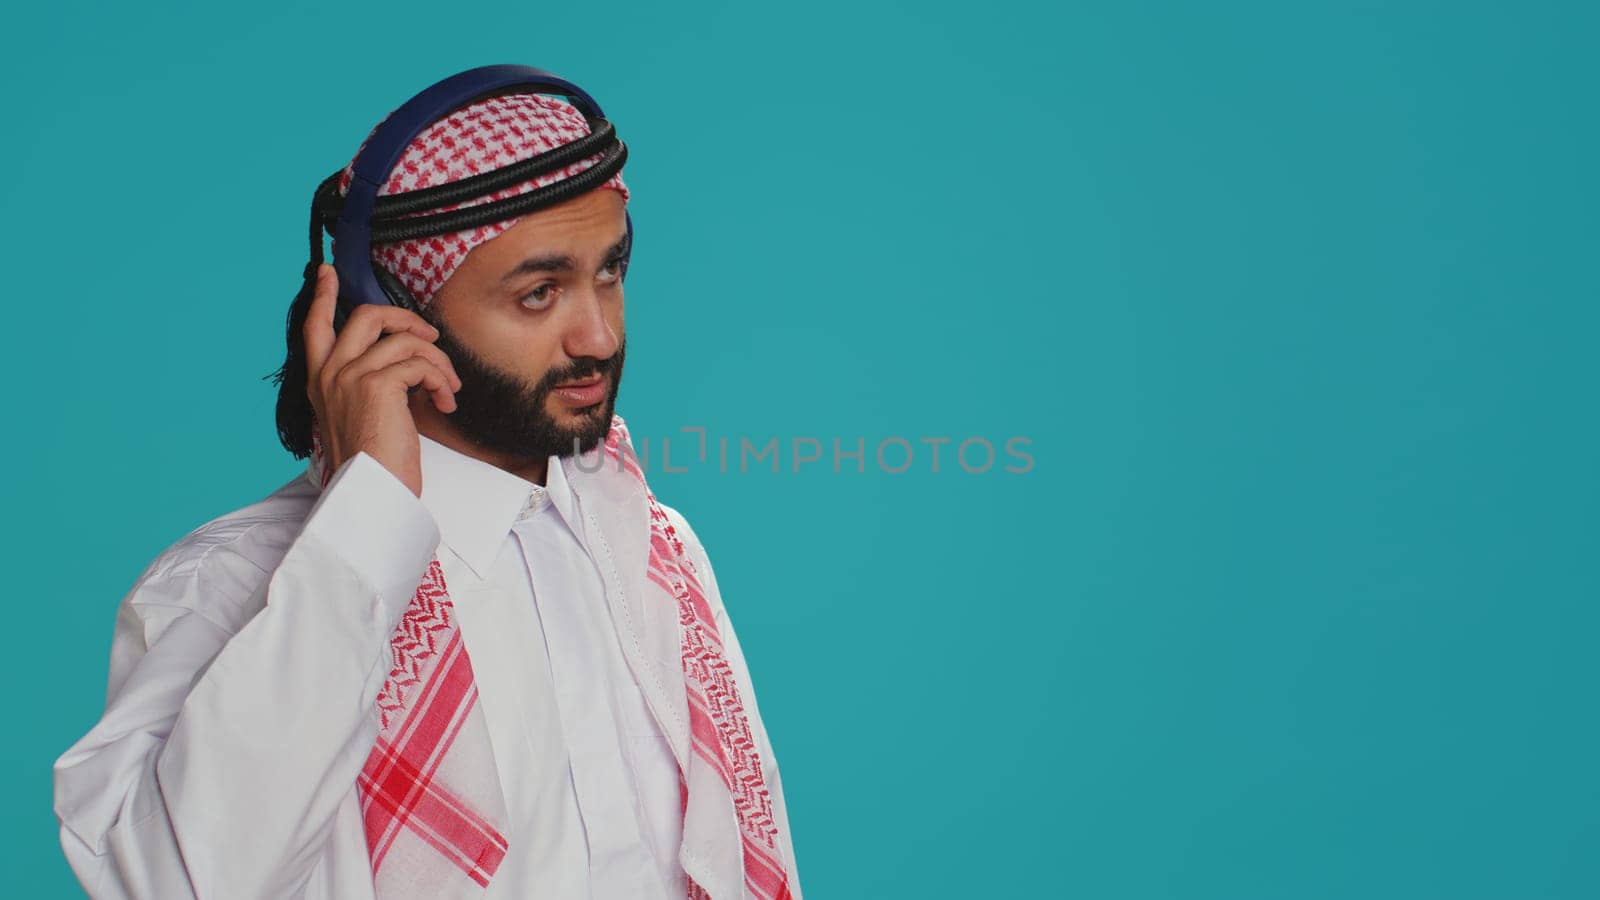 Groovy adult dancing around on camera, listening to funky songs on audio headset and having fun in studio. Middle eastern person in traditional islamic attire showing fun dance moves.